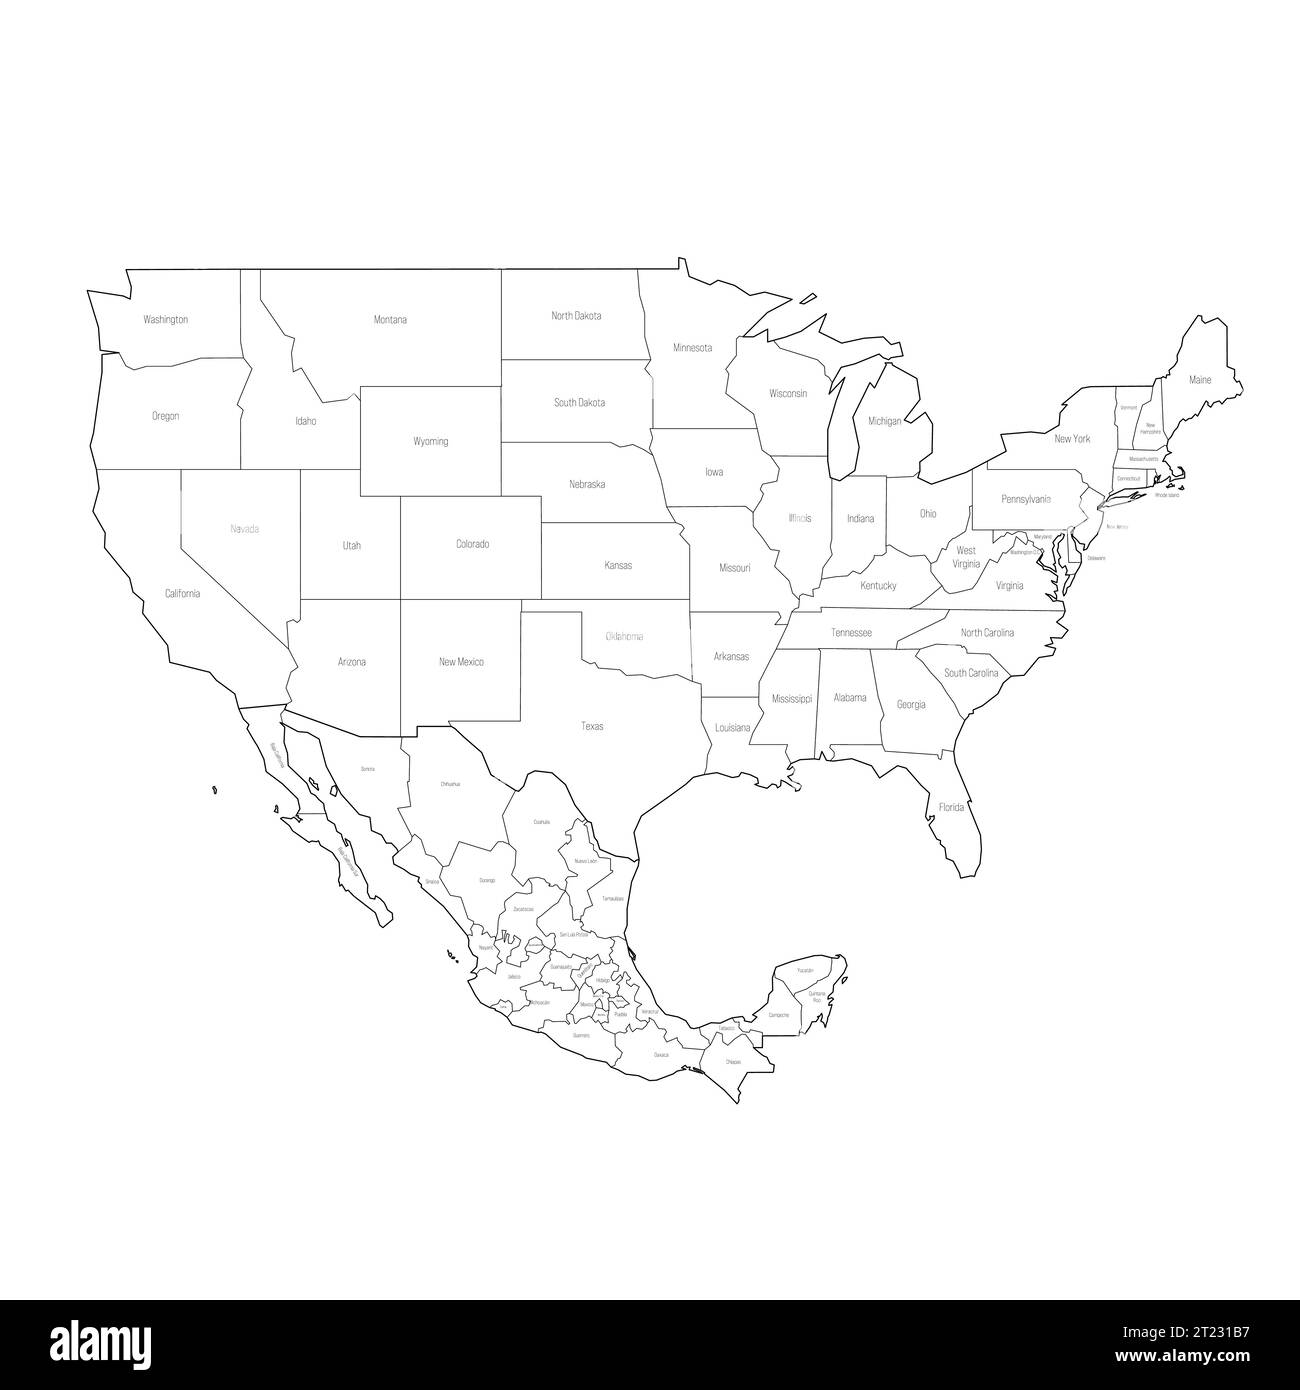 United States and Mexico political map of administrative divisions. Black outline vector map with labels. Stock Vector